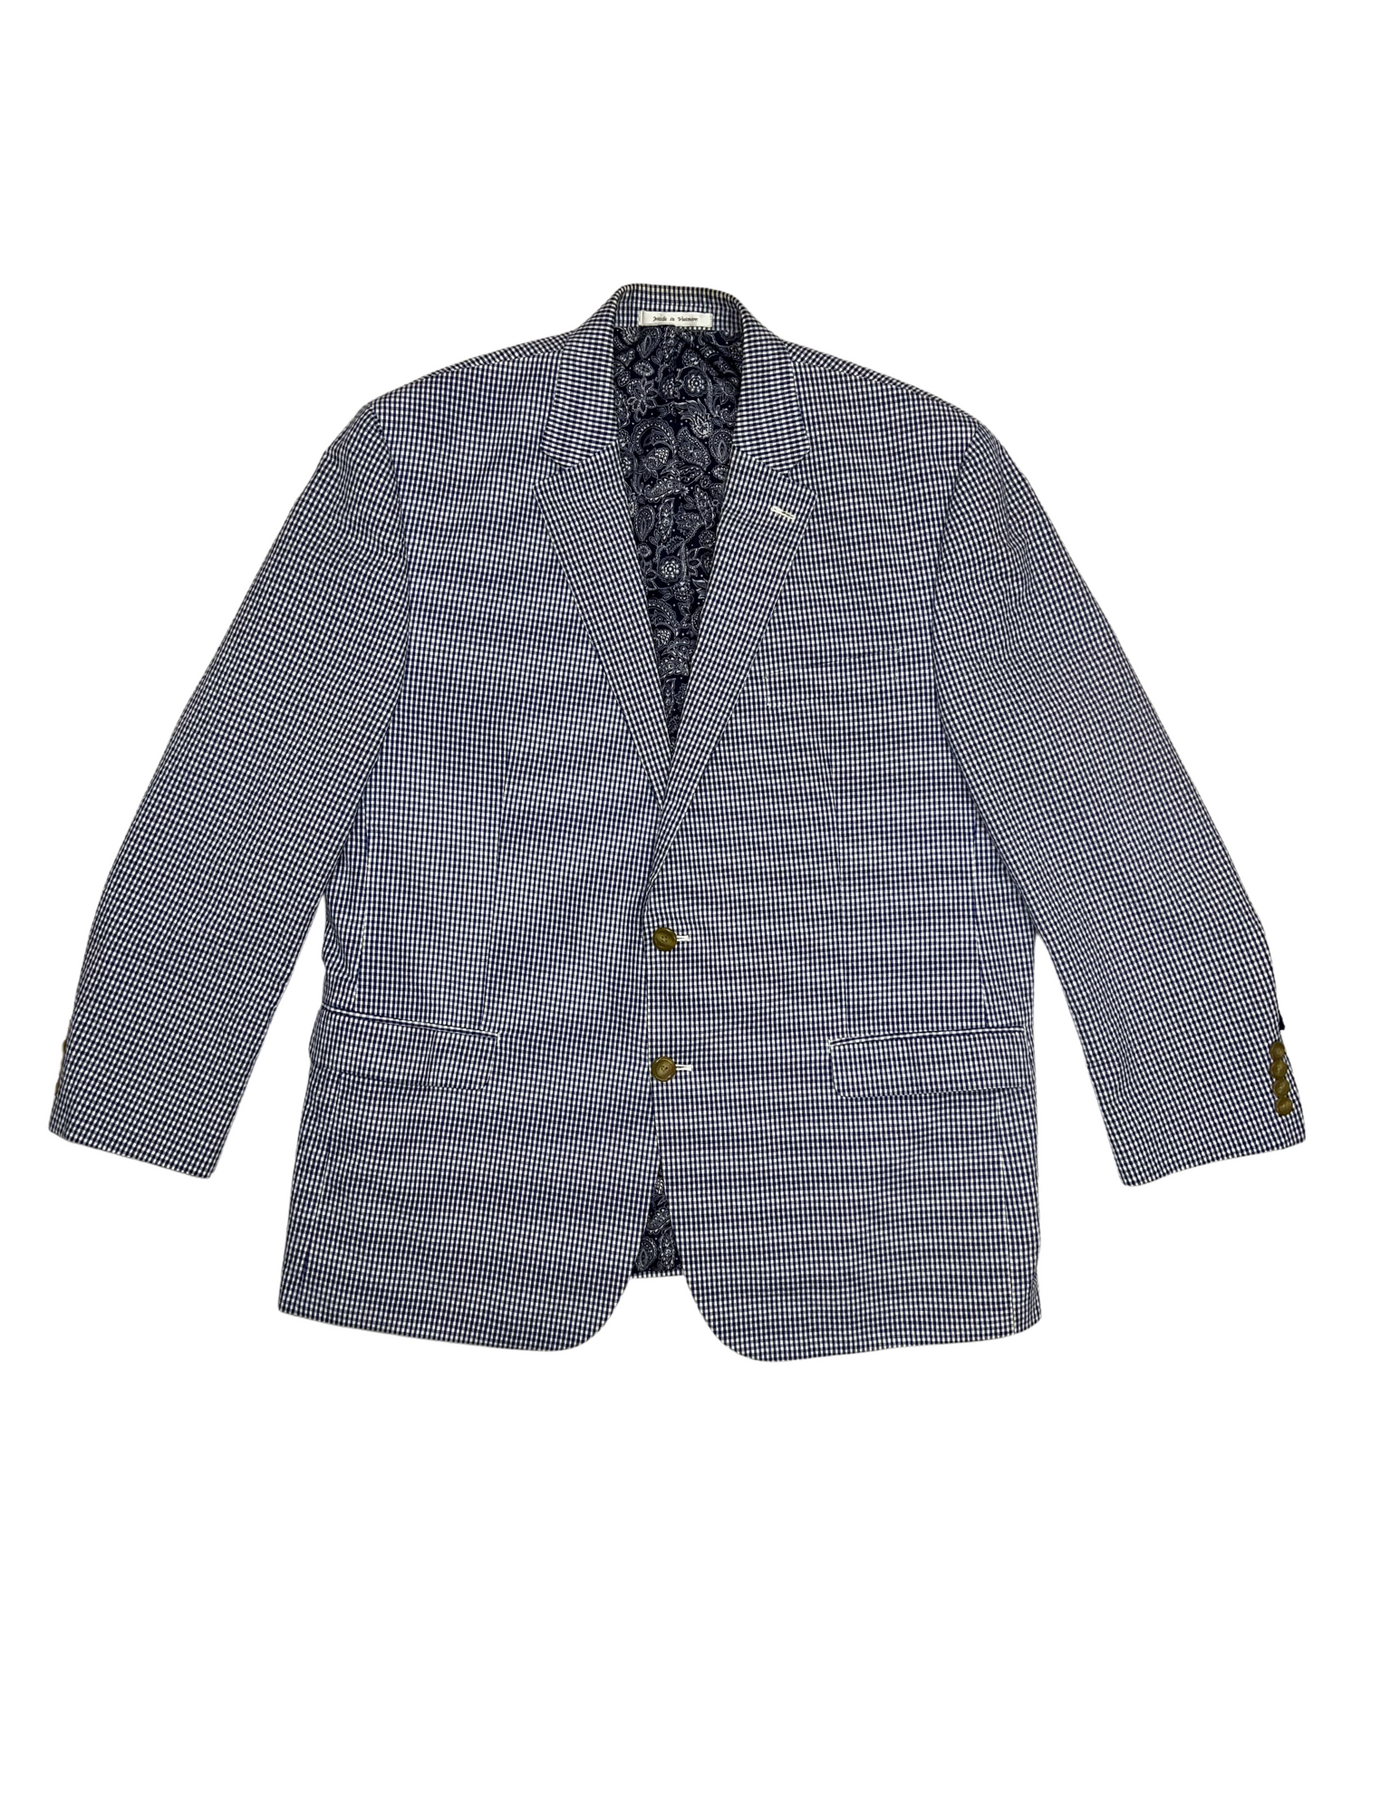 White and Blue Checkered Blazer with Navy Fringe - 46R